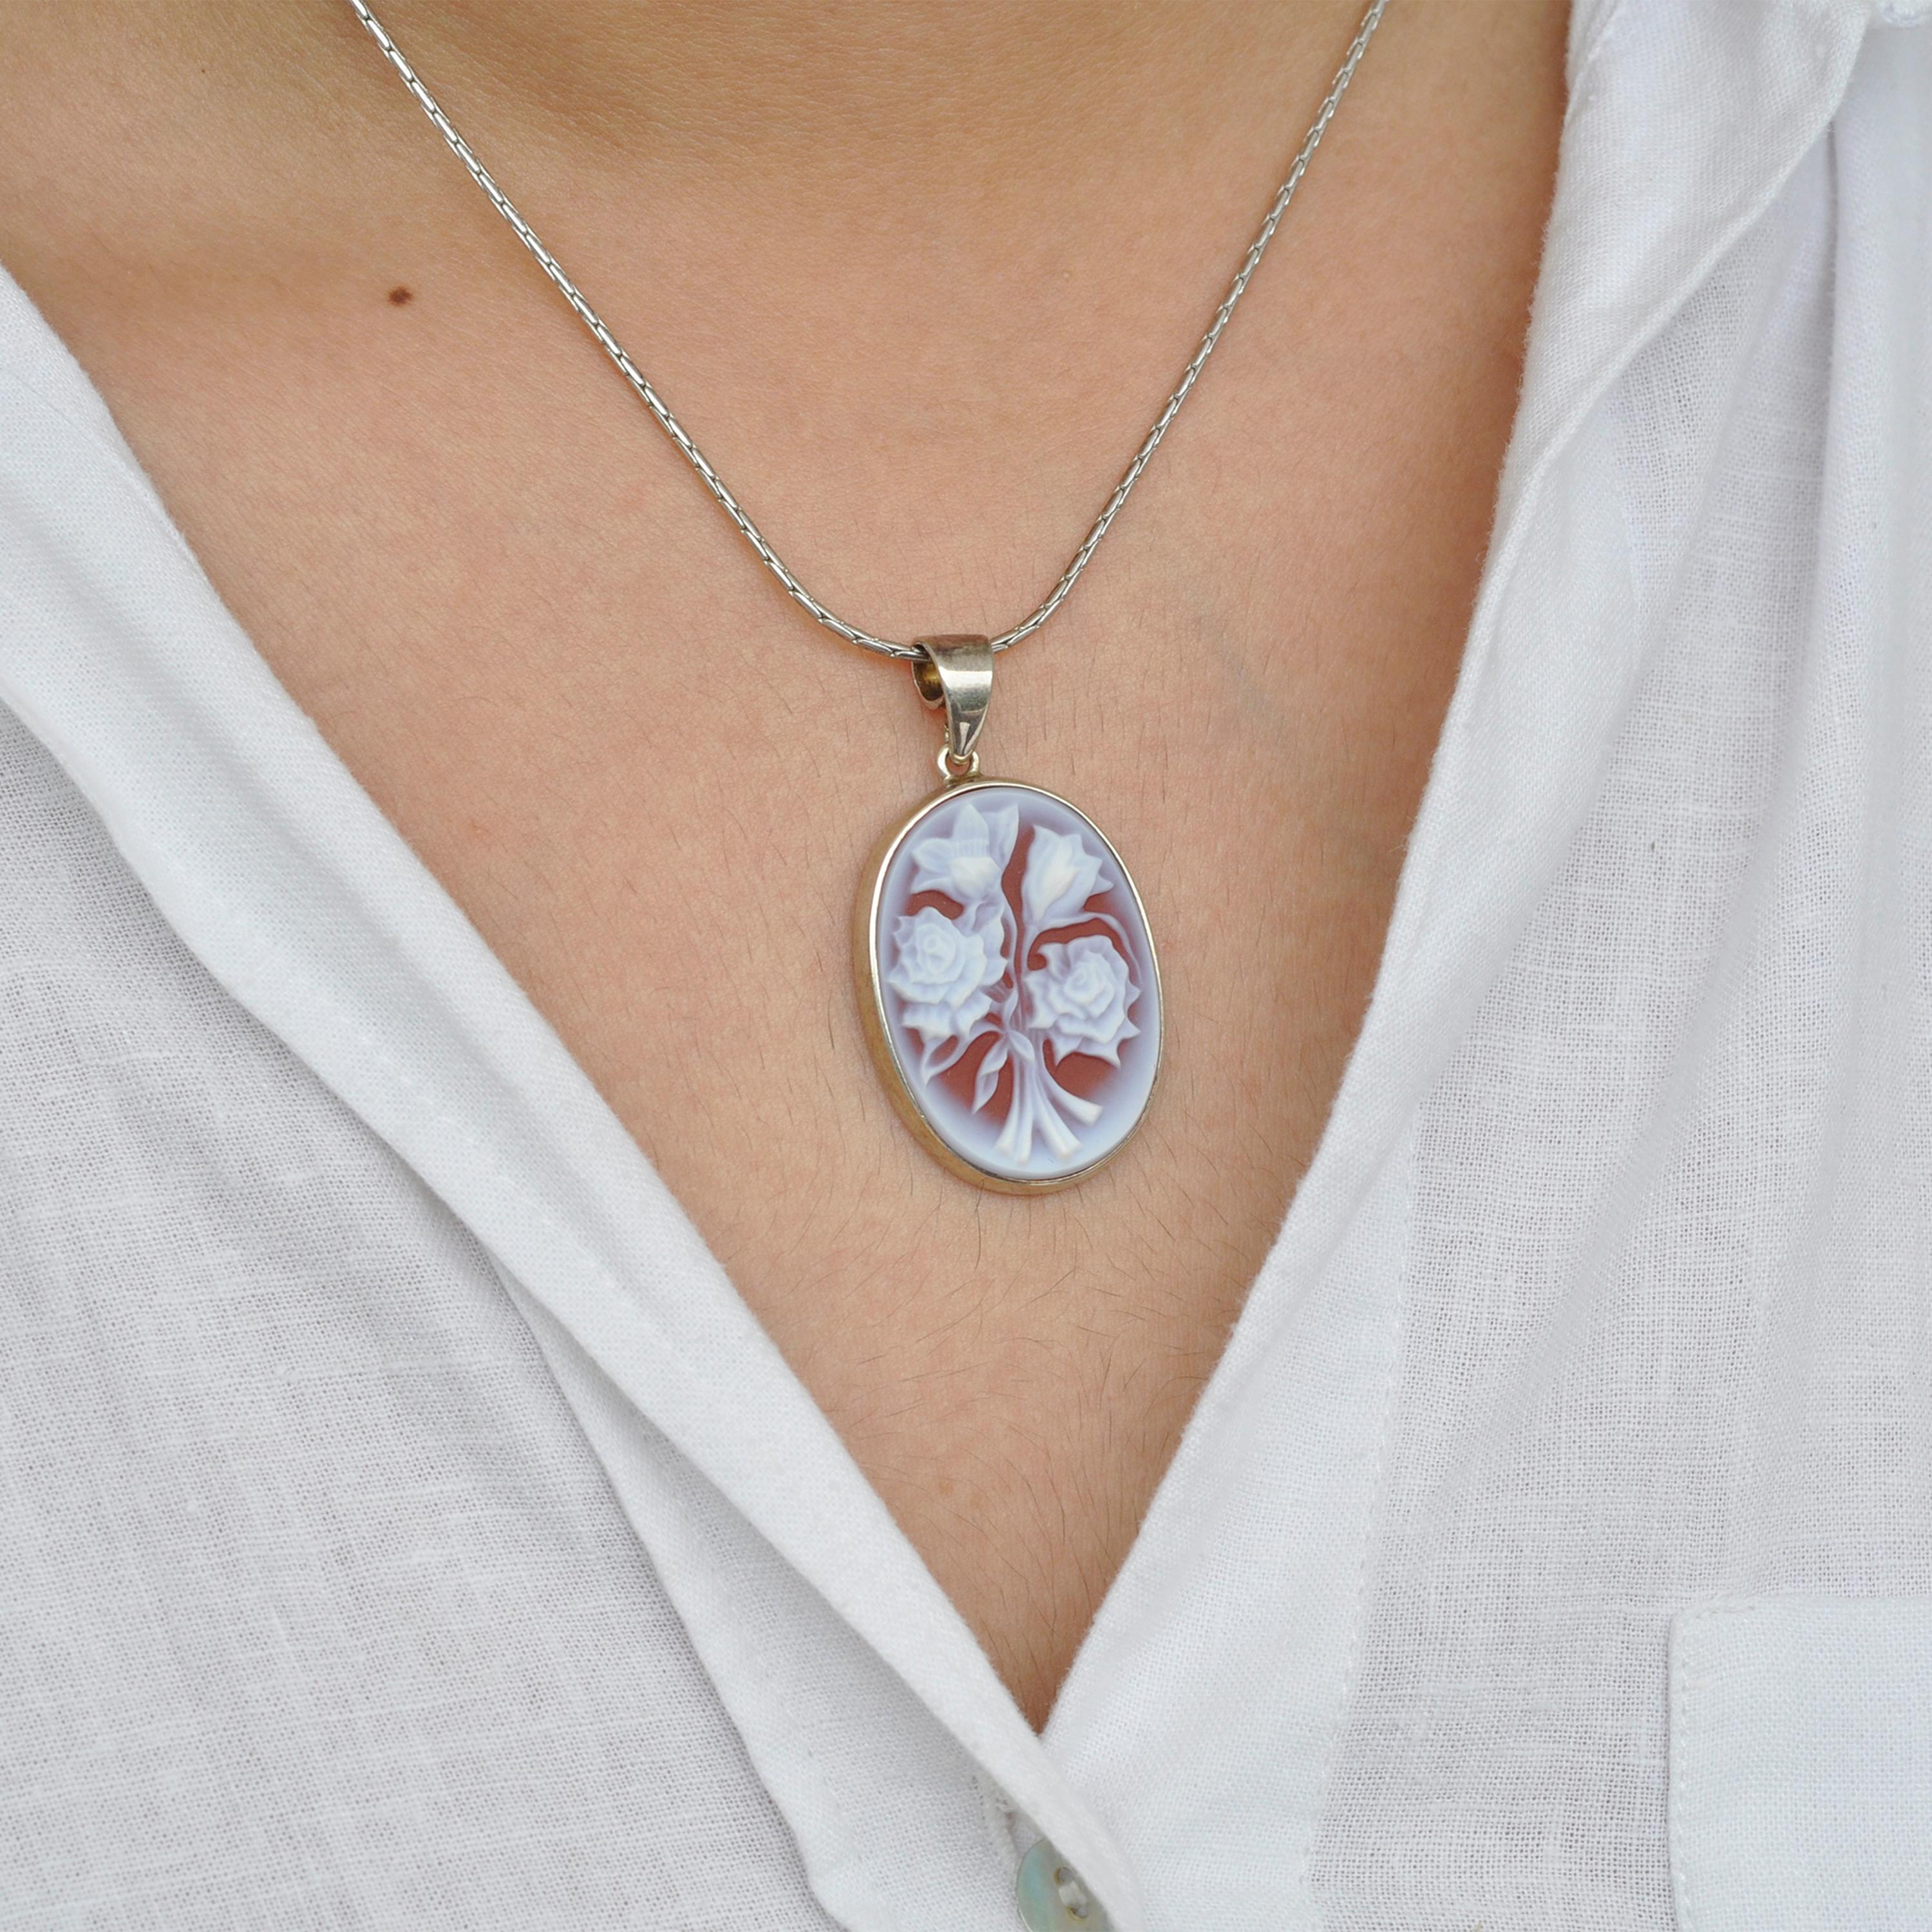 Flower bouquet carving agate cameo sterling silver pendant necklace

This Sterling Silver pendant with flower bouquet cameo carving on natural agate is absolutely gorgeous. Carved on the relief of a 30x22mm oval natural agate, the detailing of this